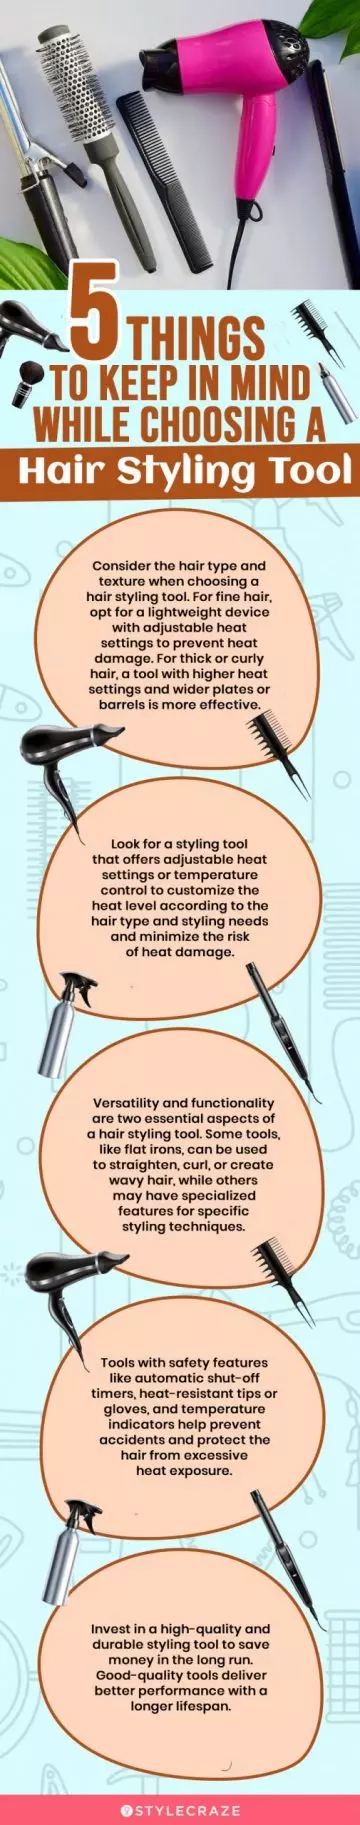 5 Things To Keep In Mind While Choosing A Hair Styling Tool(infographic)